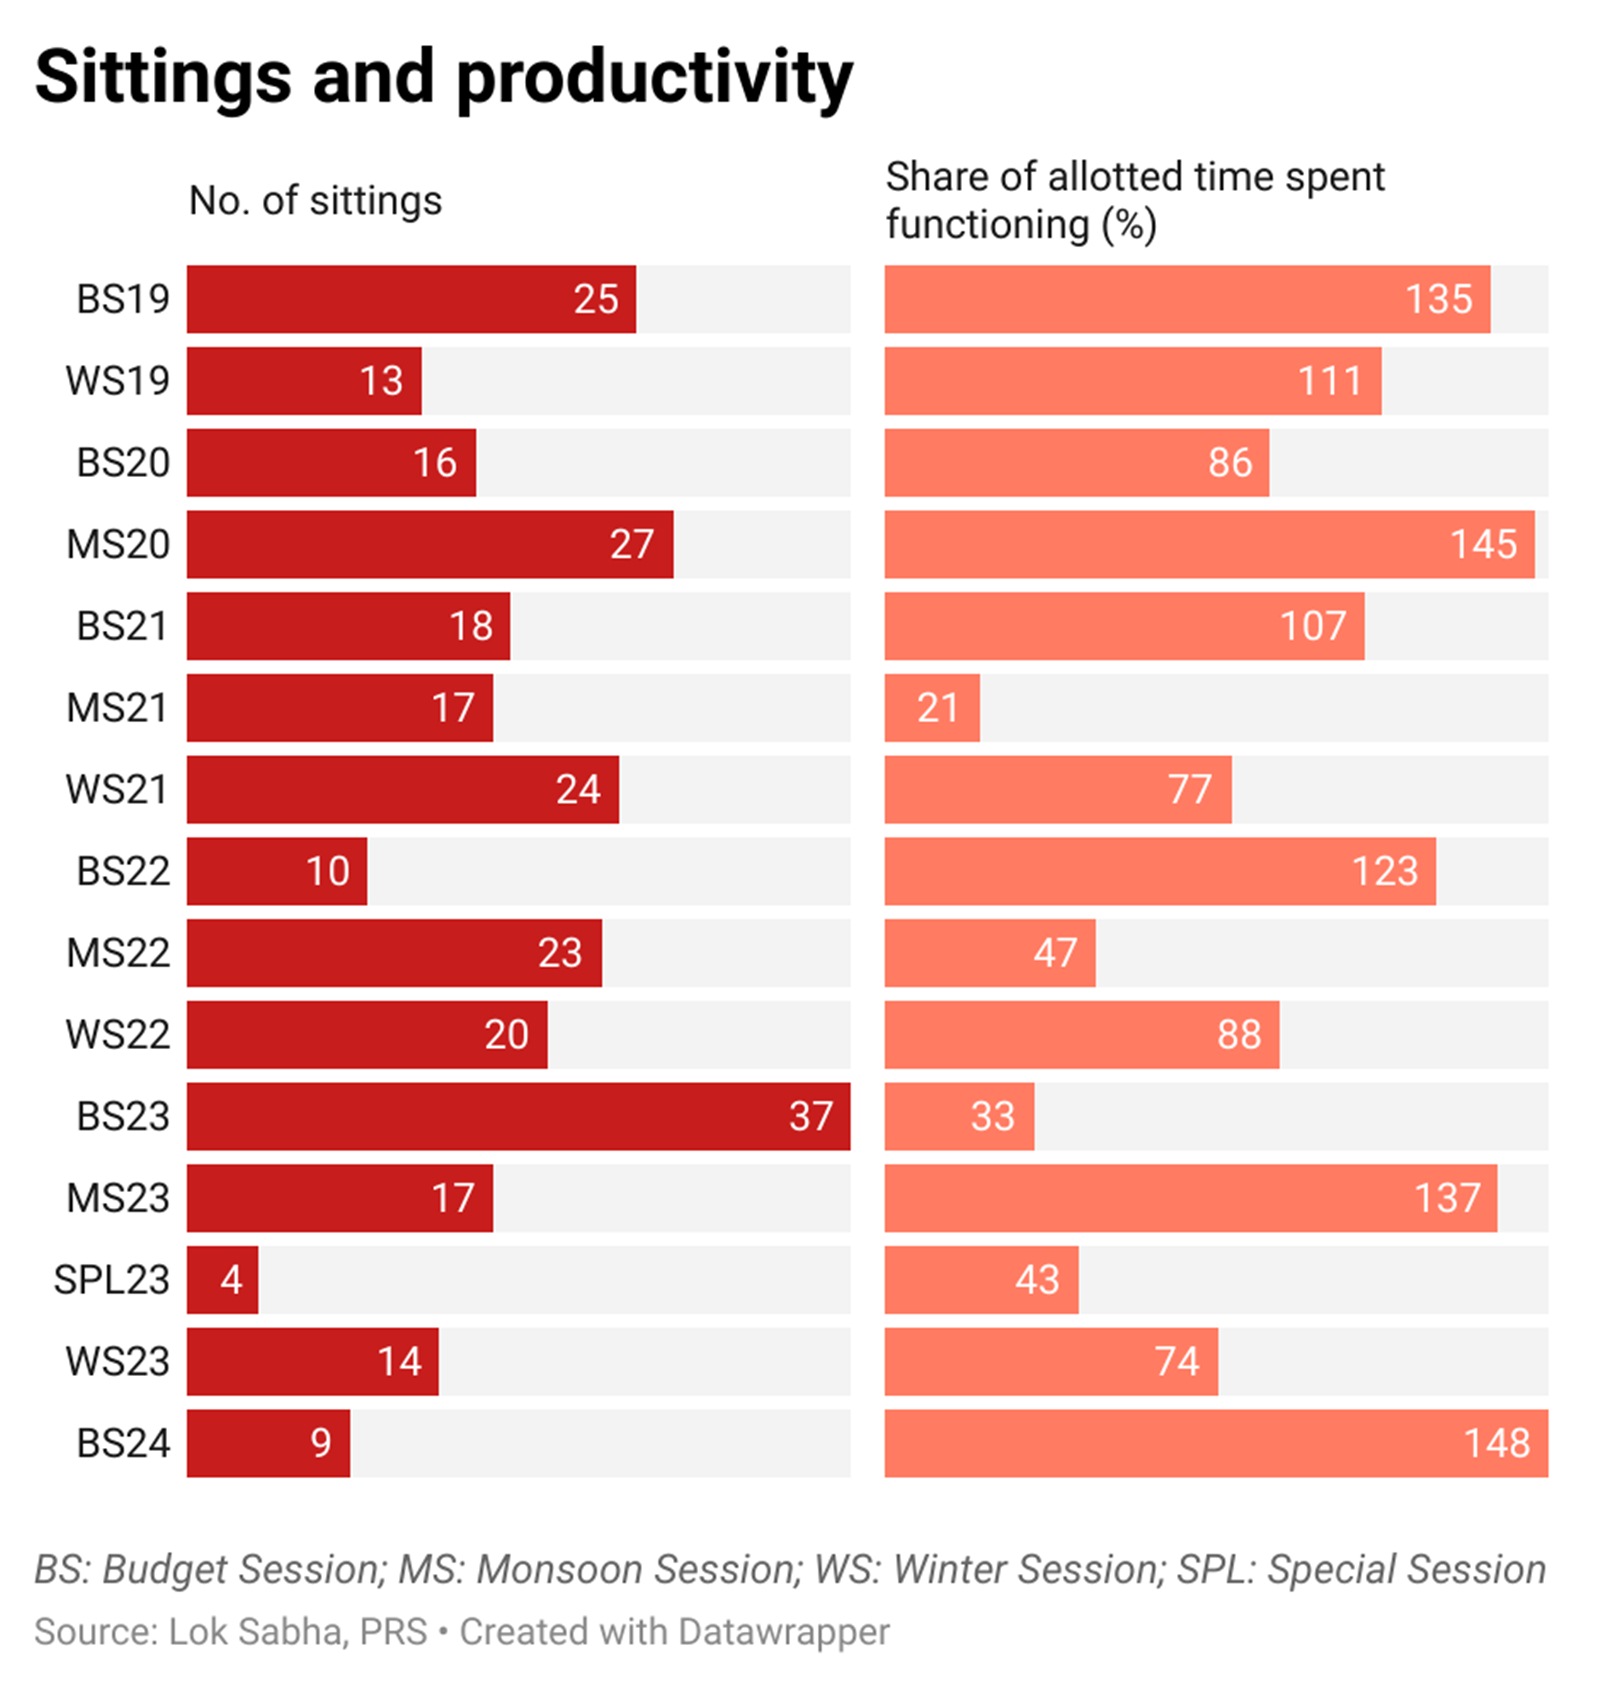 Sittings and productivity